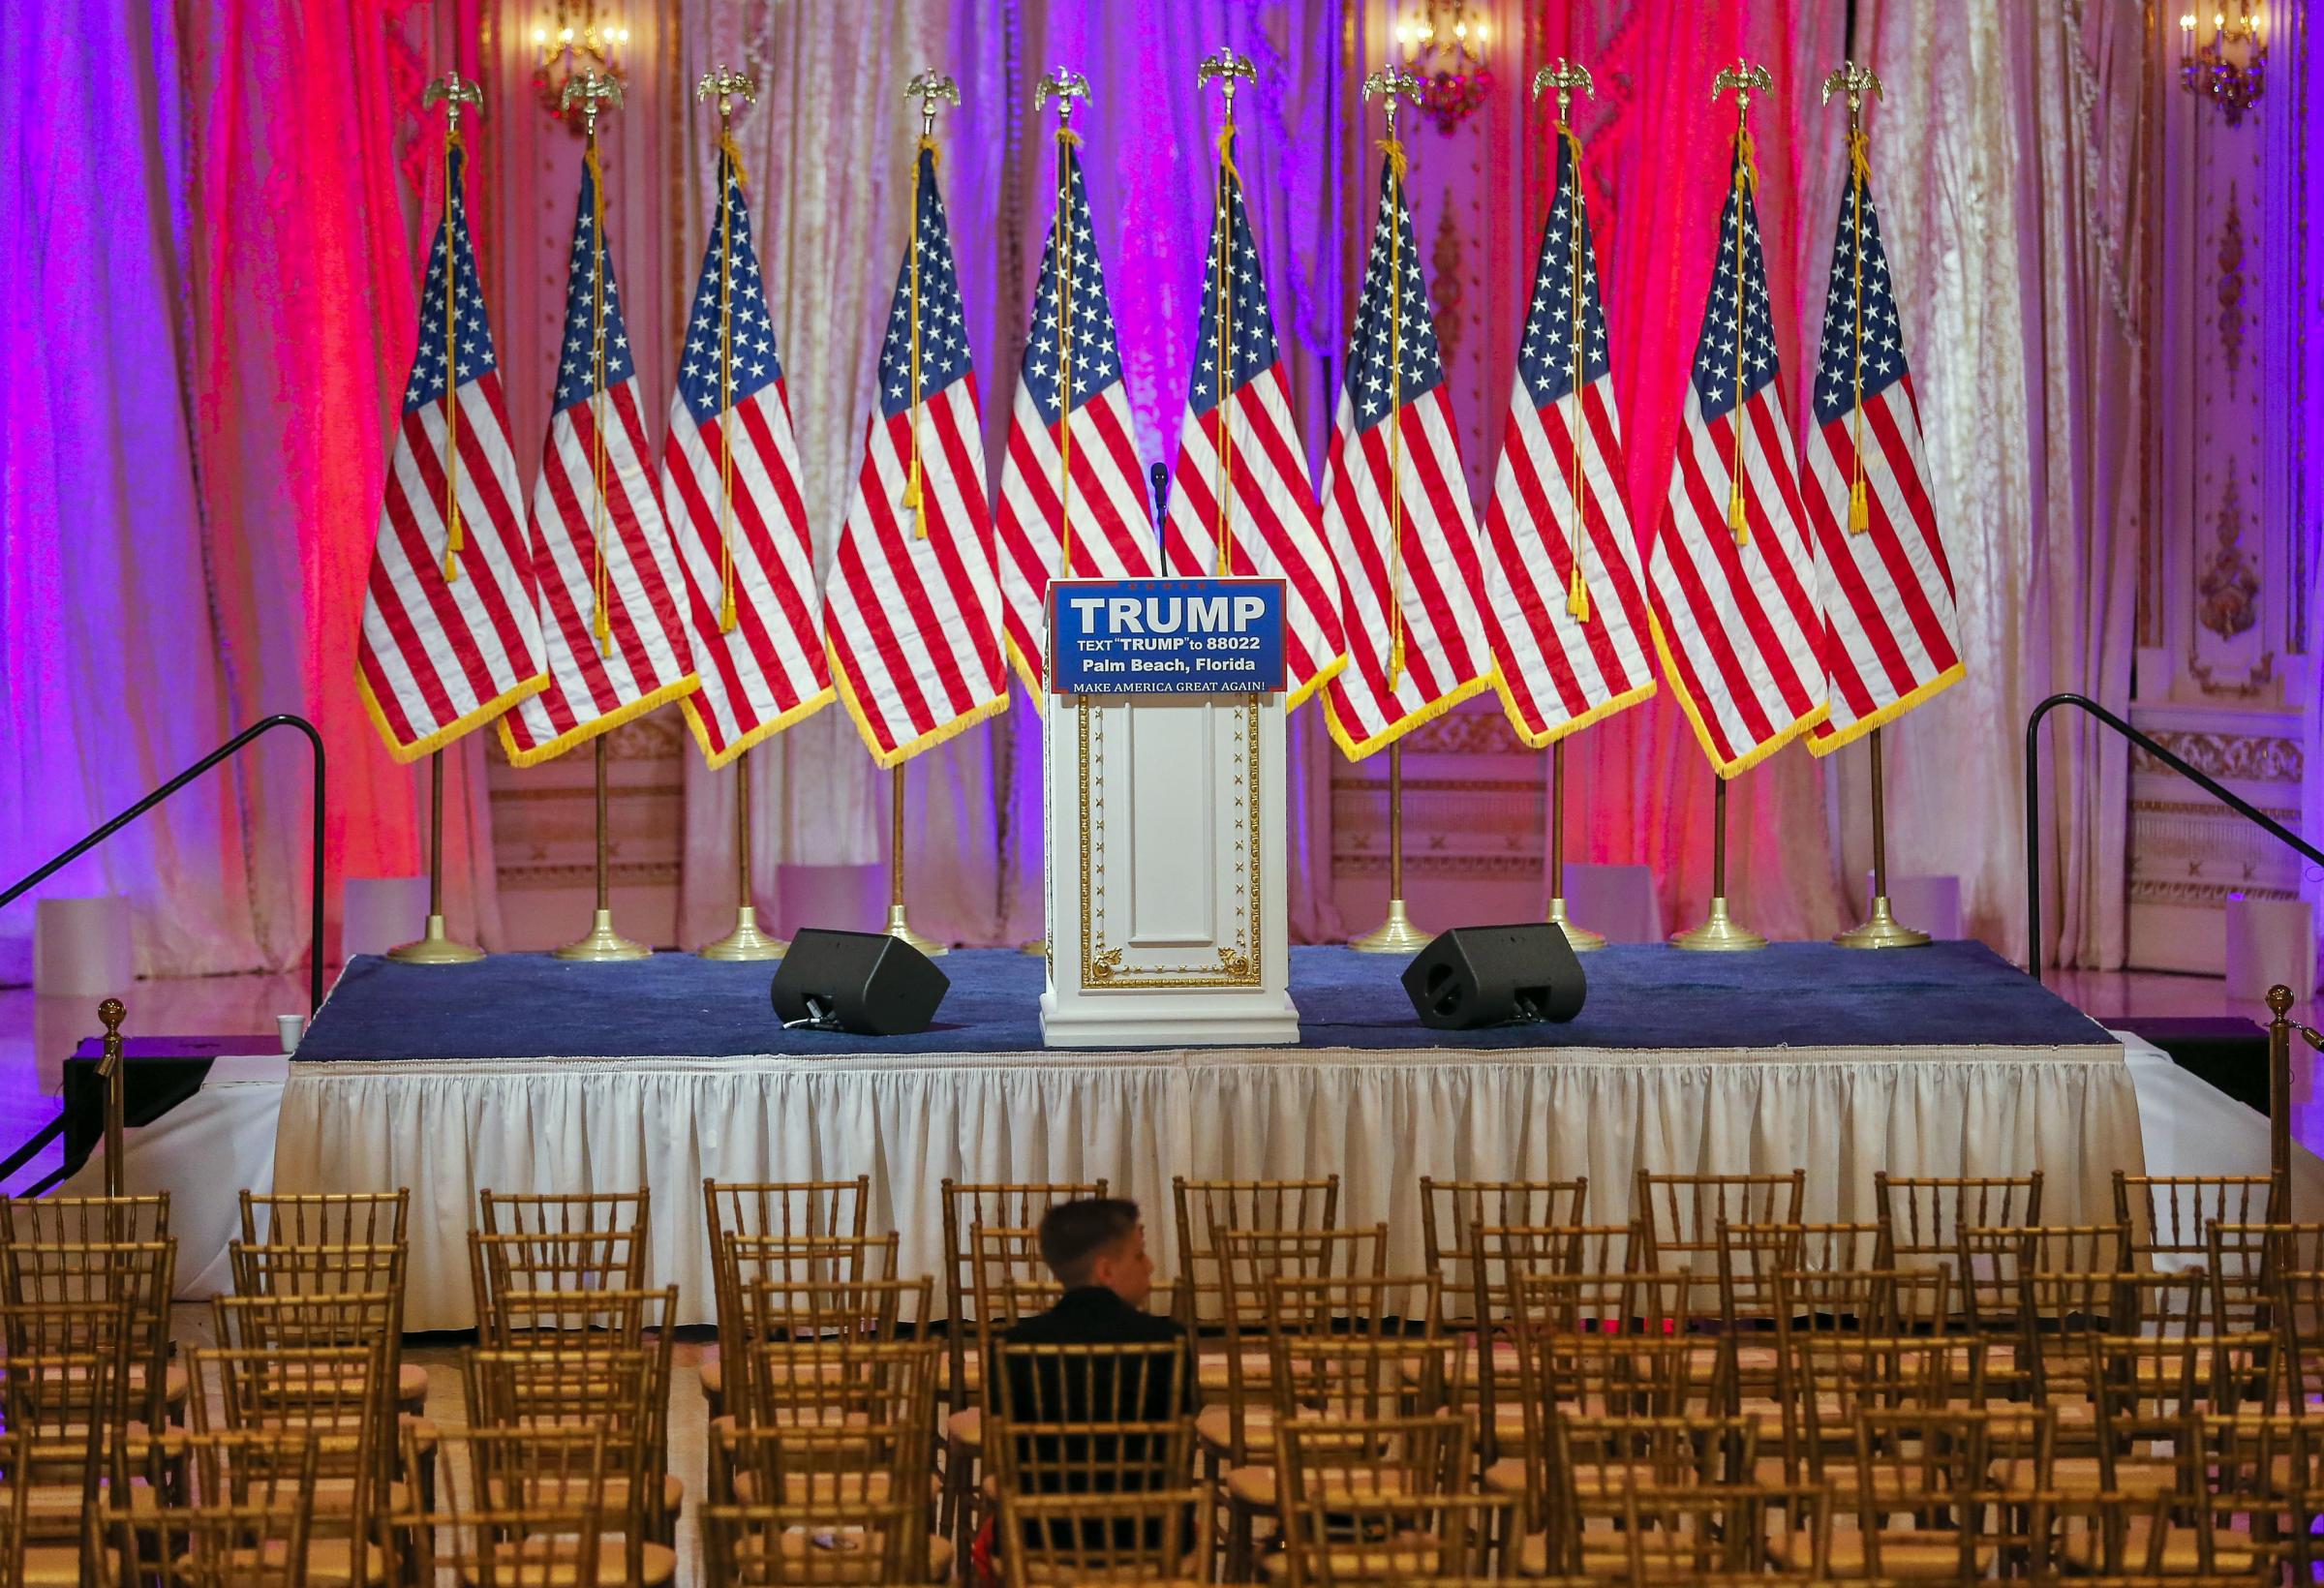 A boy sits near the stage where Republican presidential candidate Donald Trump is scheduled to participate in a news conference inside a ballroom at the Mar-a-Lago Club in Palm Beach, Fla. on March 15, 2016.